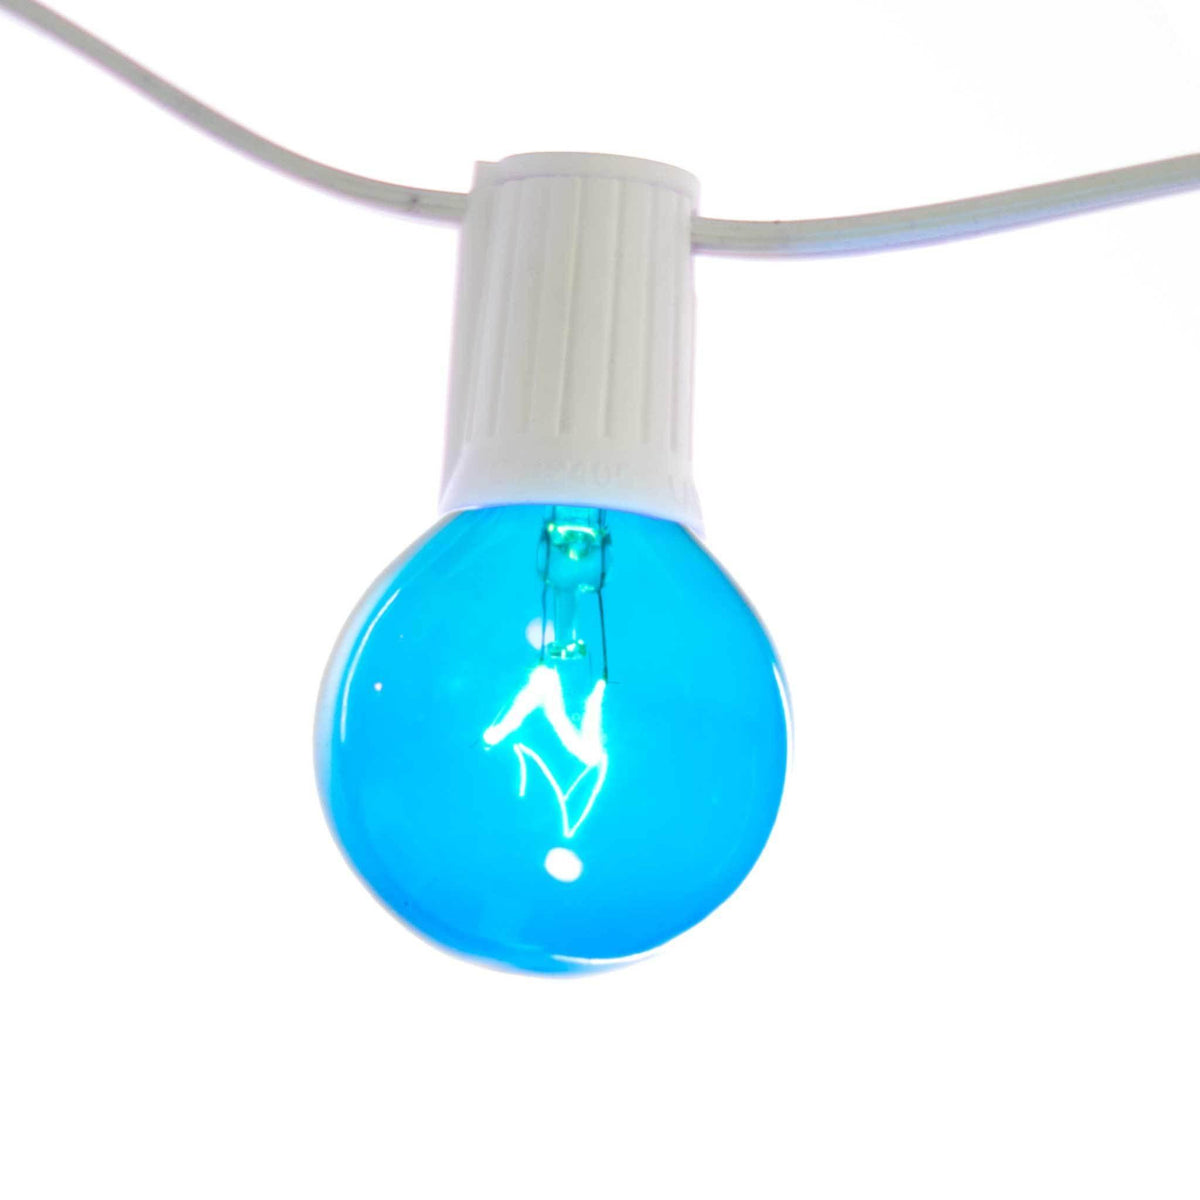 1 Box of 25 of brand new transparent Blue G40 Globe Light Bulbs Replace your old bulbs today from leedisplay.com